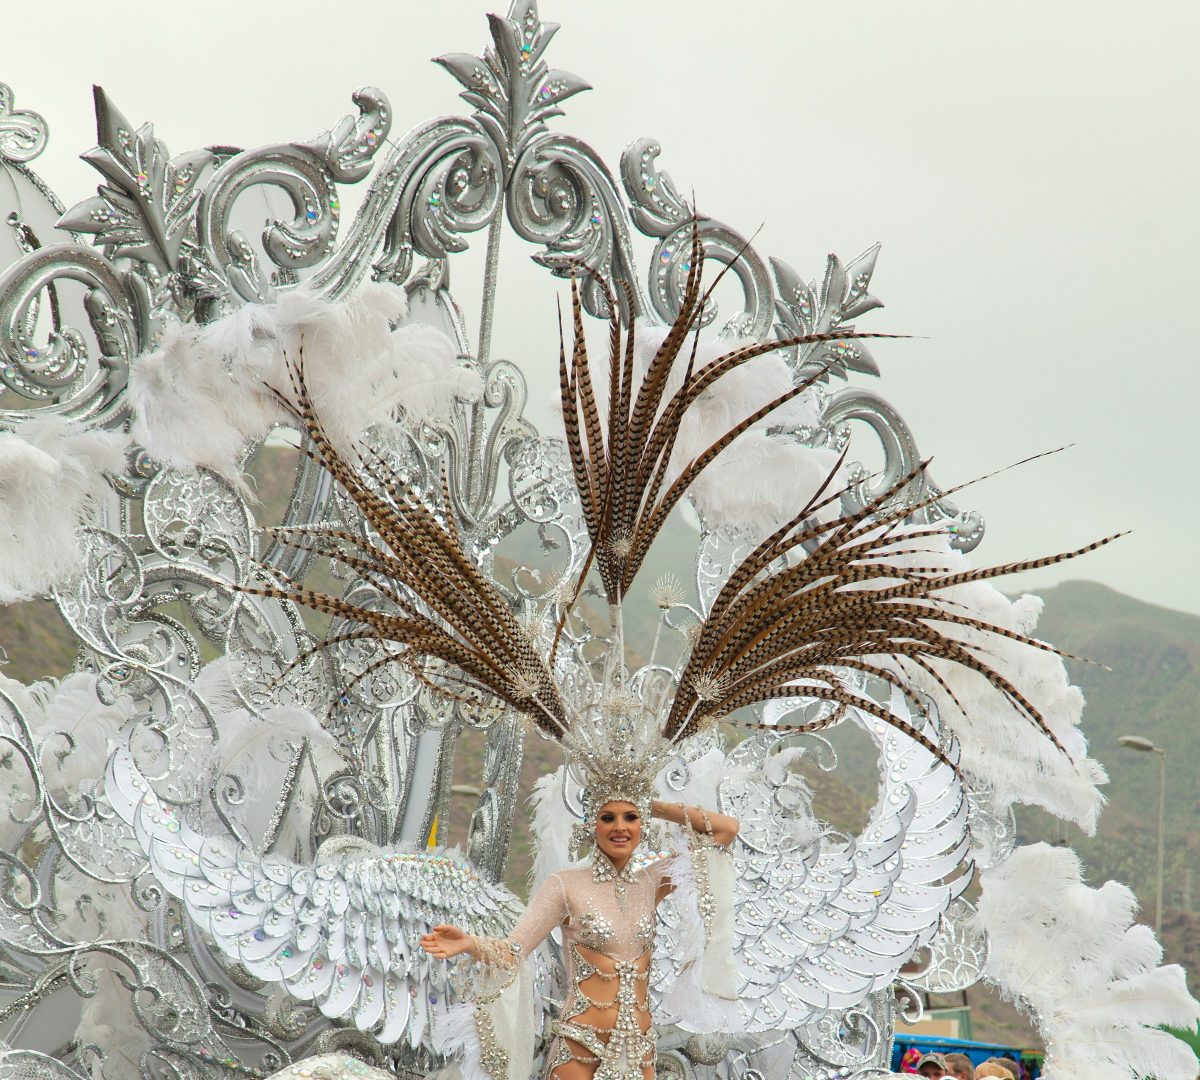 A woman parading a gigantic costume